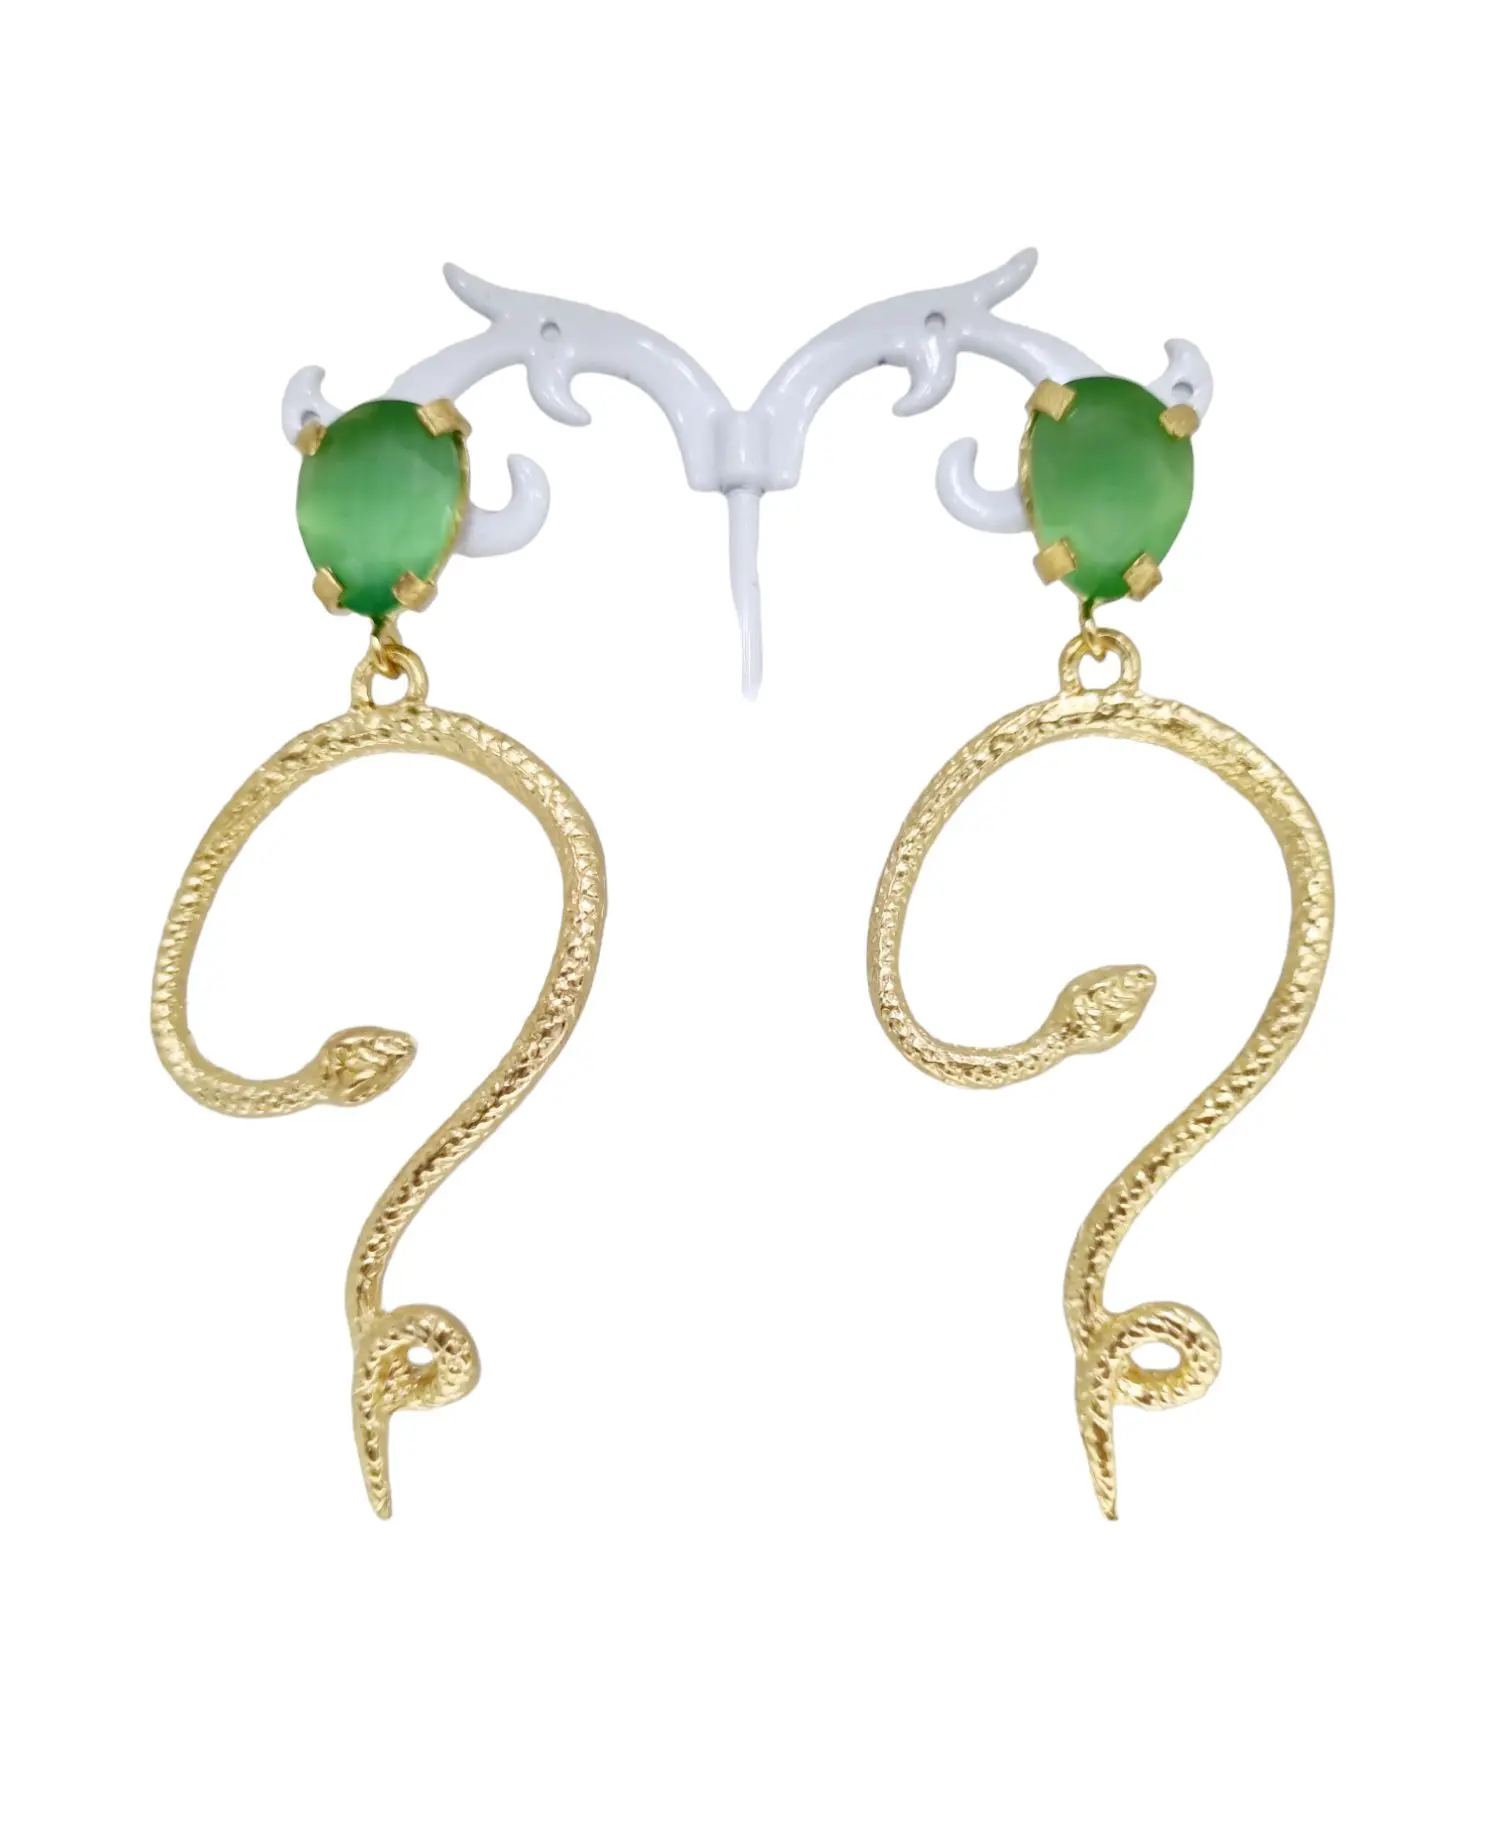 Snake earrings made of brass with cat's eye stud. Length 8cm Weight 10g